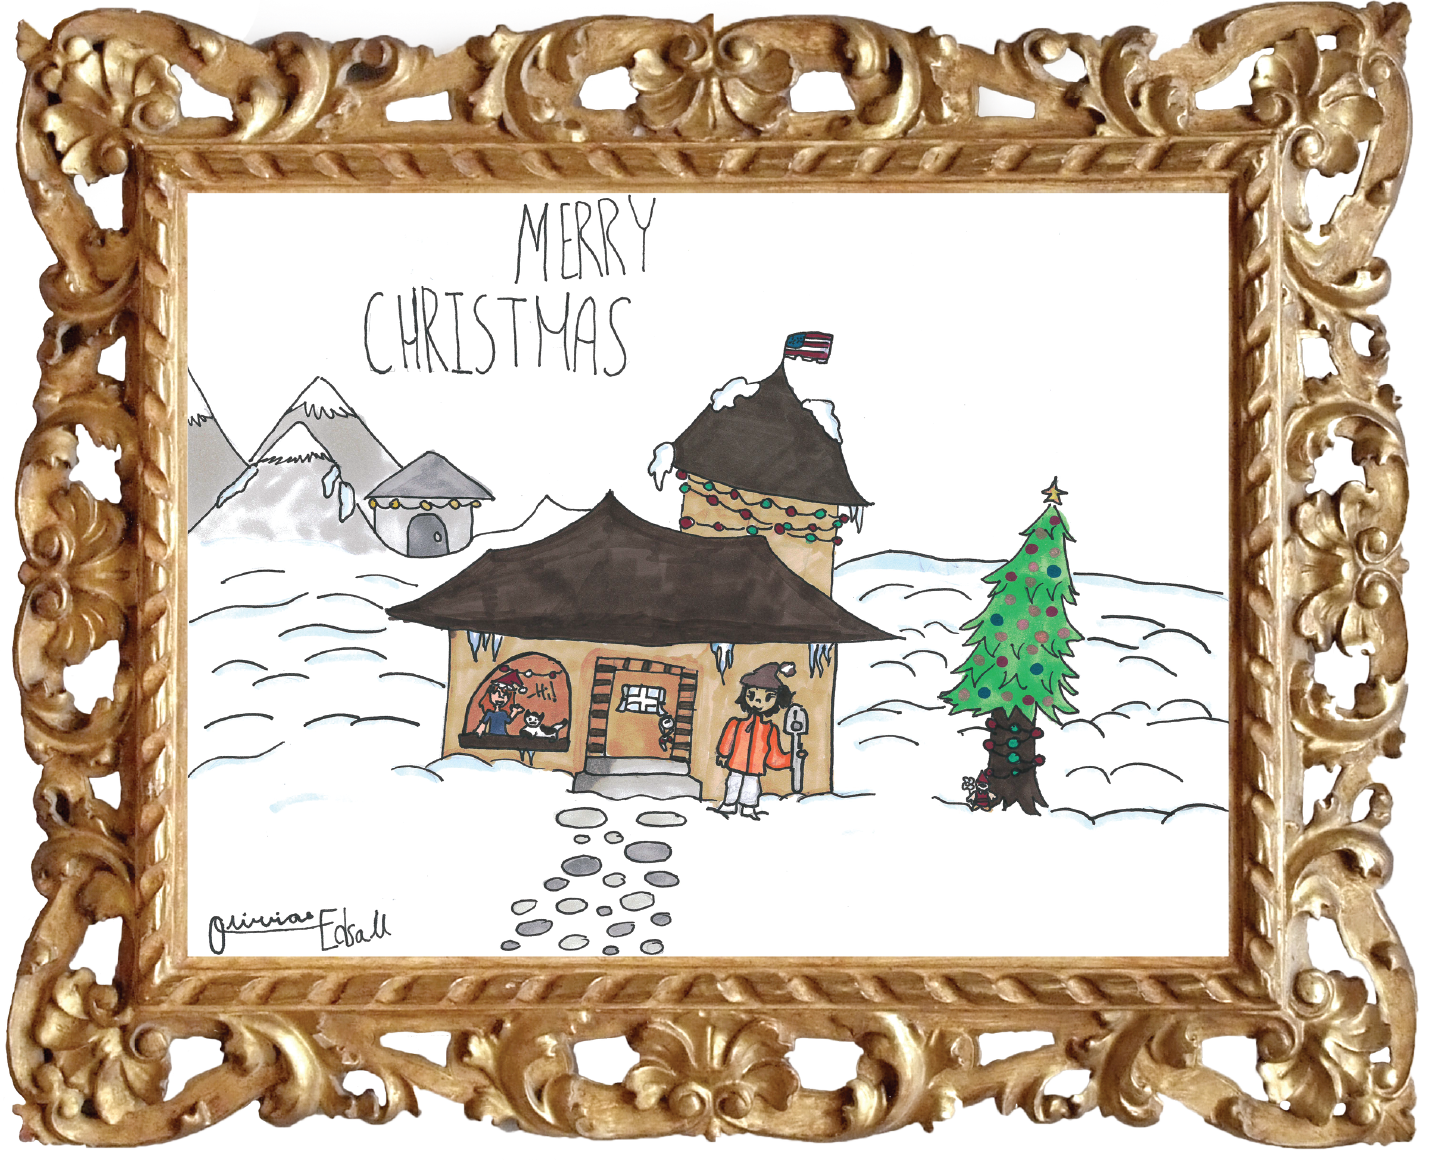 Artwork by Olivia Edsall from Lafayette, the winner of 2022's SREC Holiday Card Art Contest